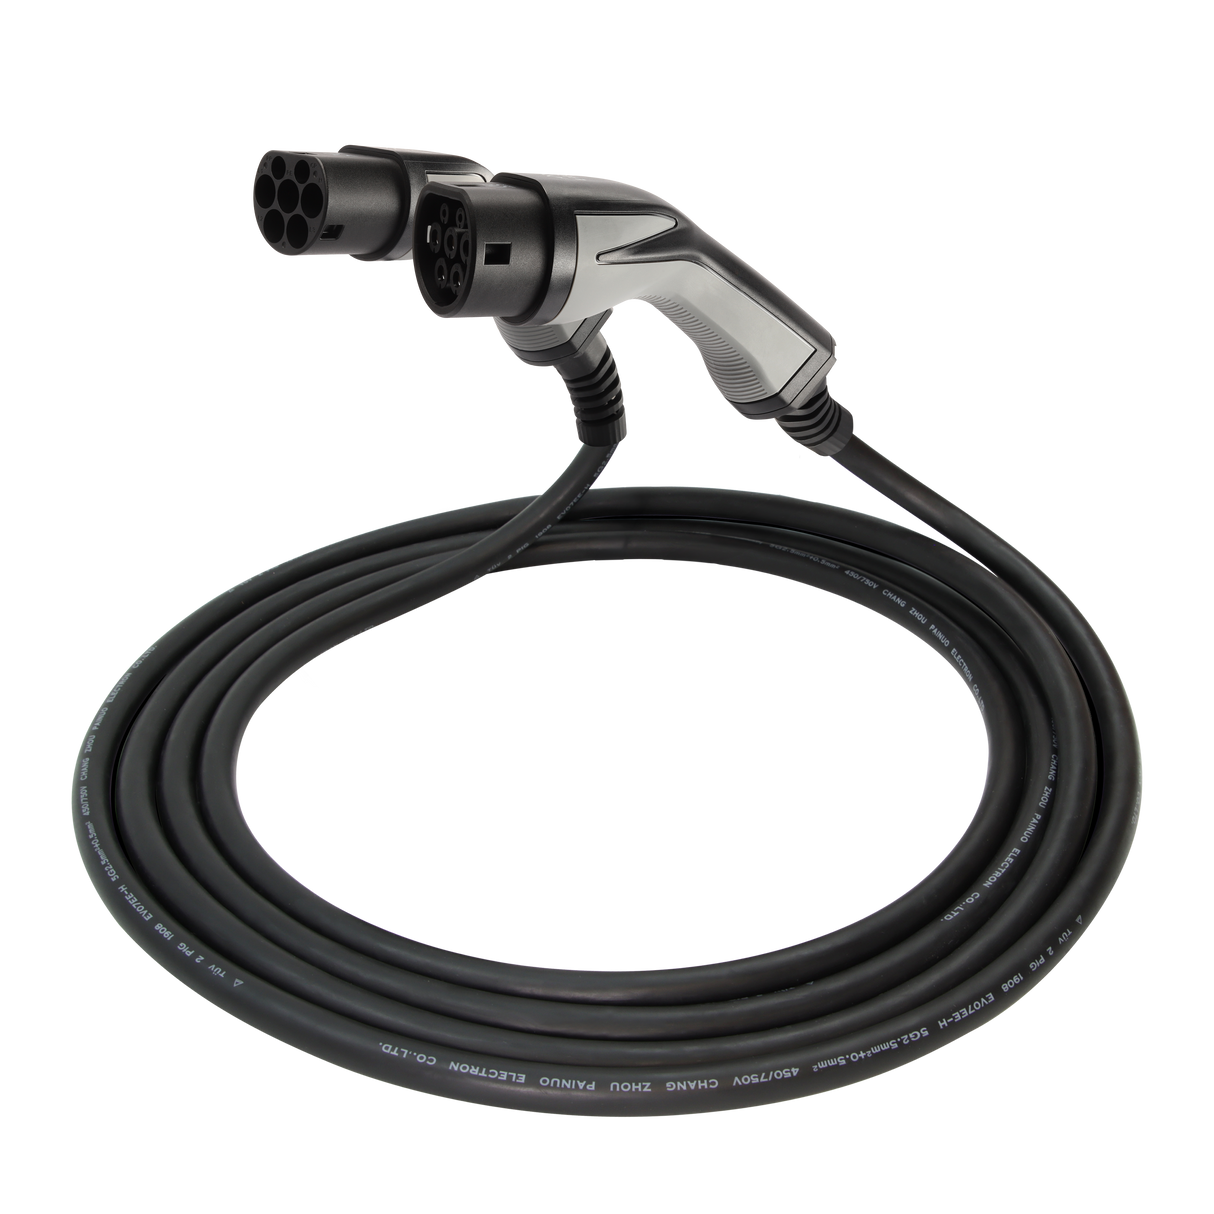 Charging cable Polestar 3 - Erock Pro Type 2 - 16A 3 phase (11 kW)